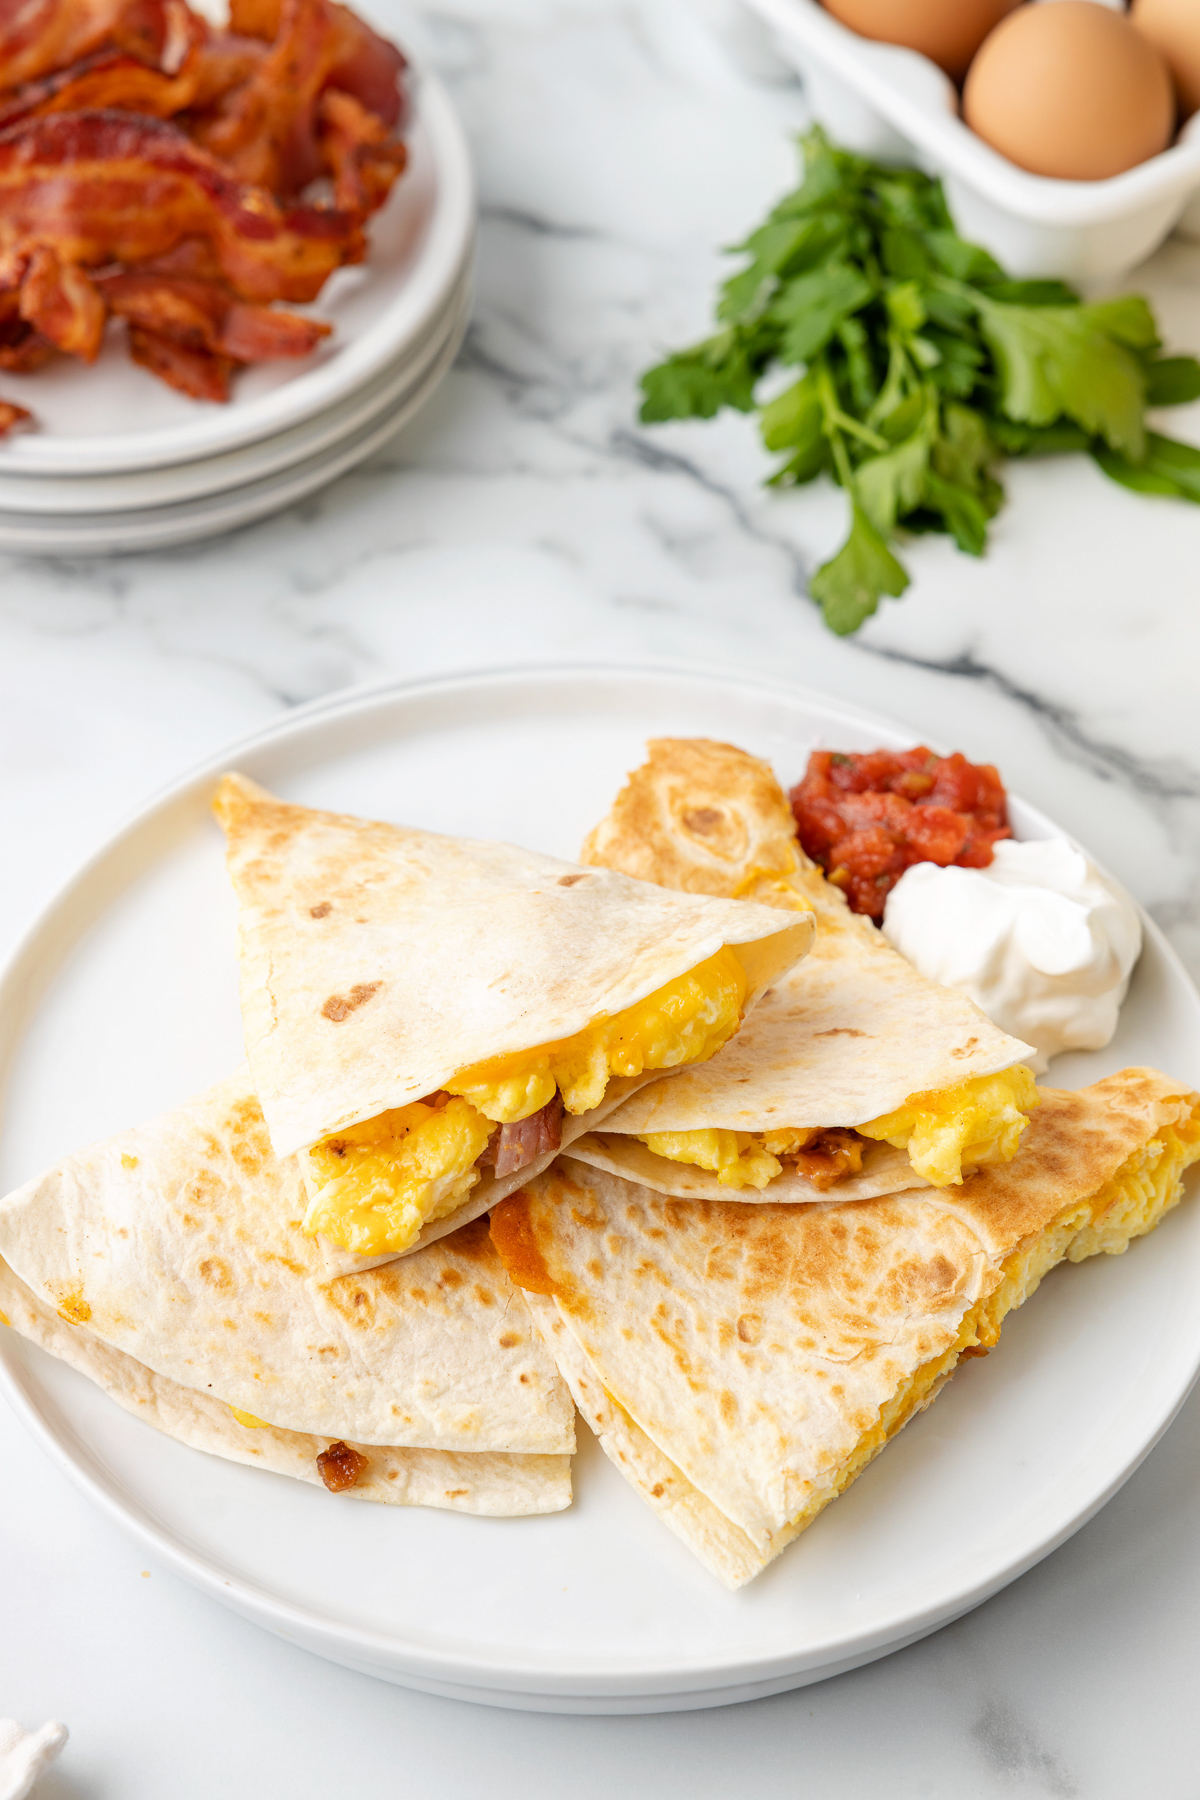 A breakfast quesadilla cut into four slices, on a plate with sour cream and salsa.